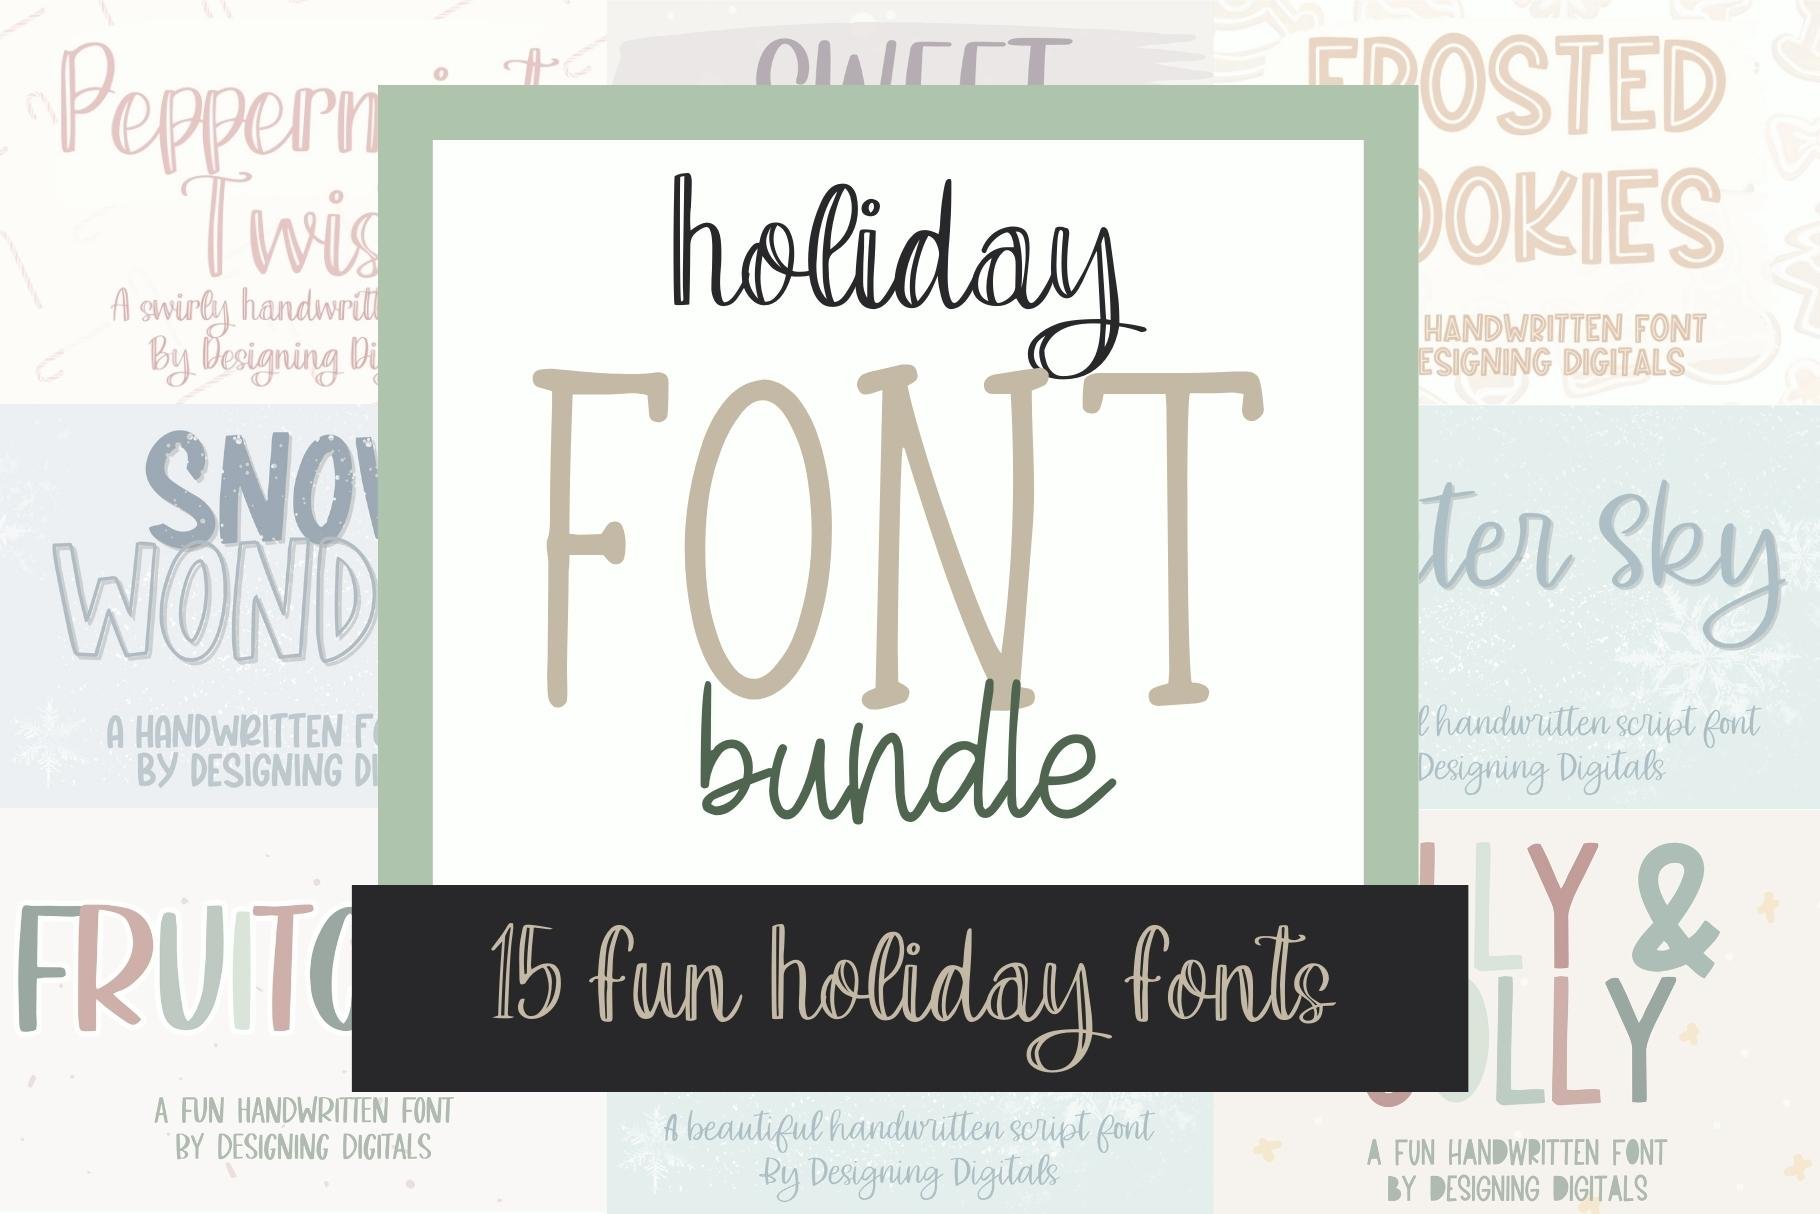 Holiday Handwritten Font Bundle cover image.